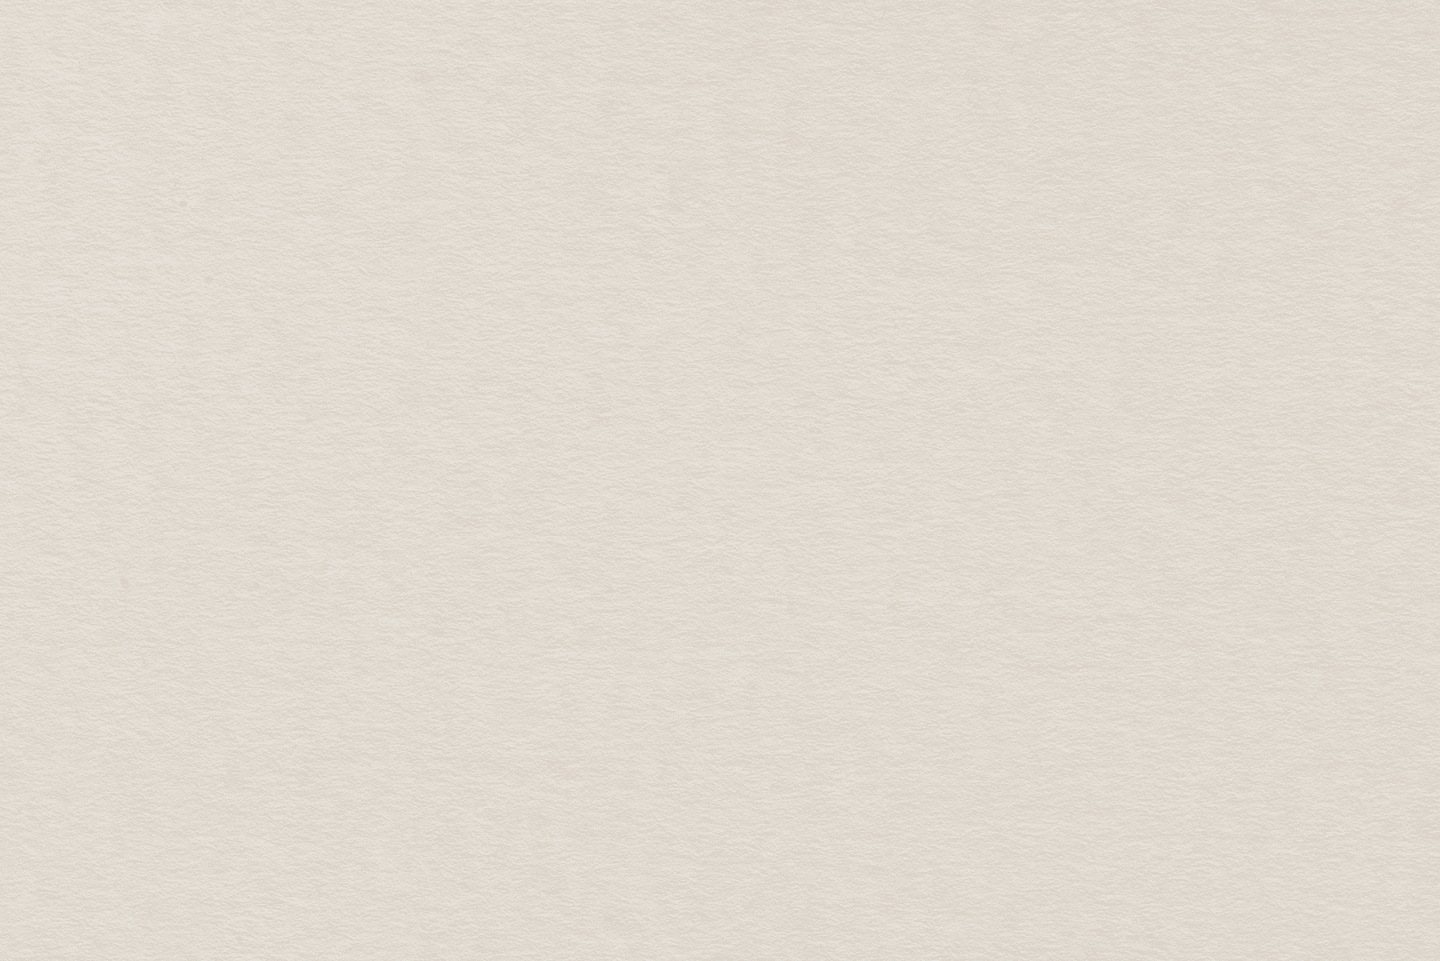 r594-r389-craft-texture-brown-journal-notewebready-16389698693266-16516709339758.png